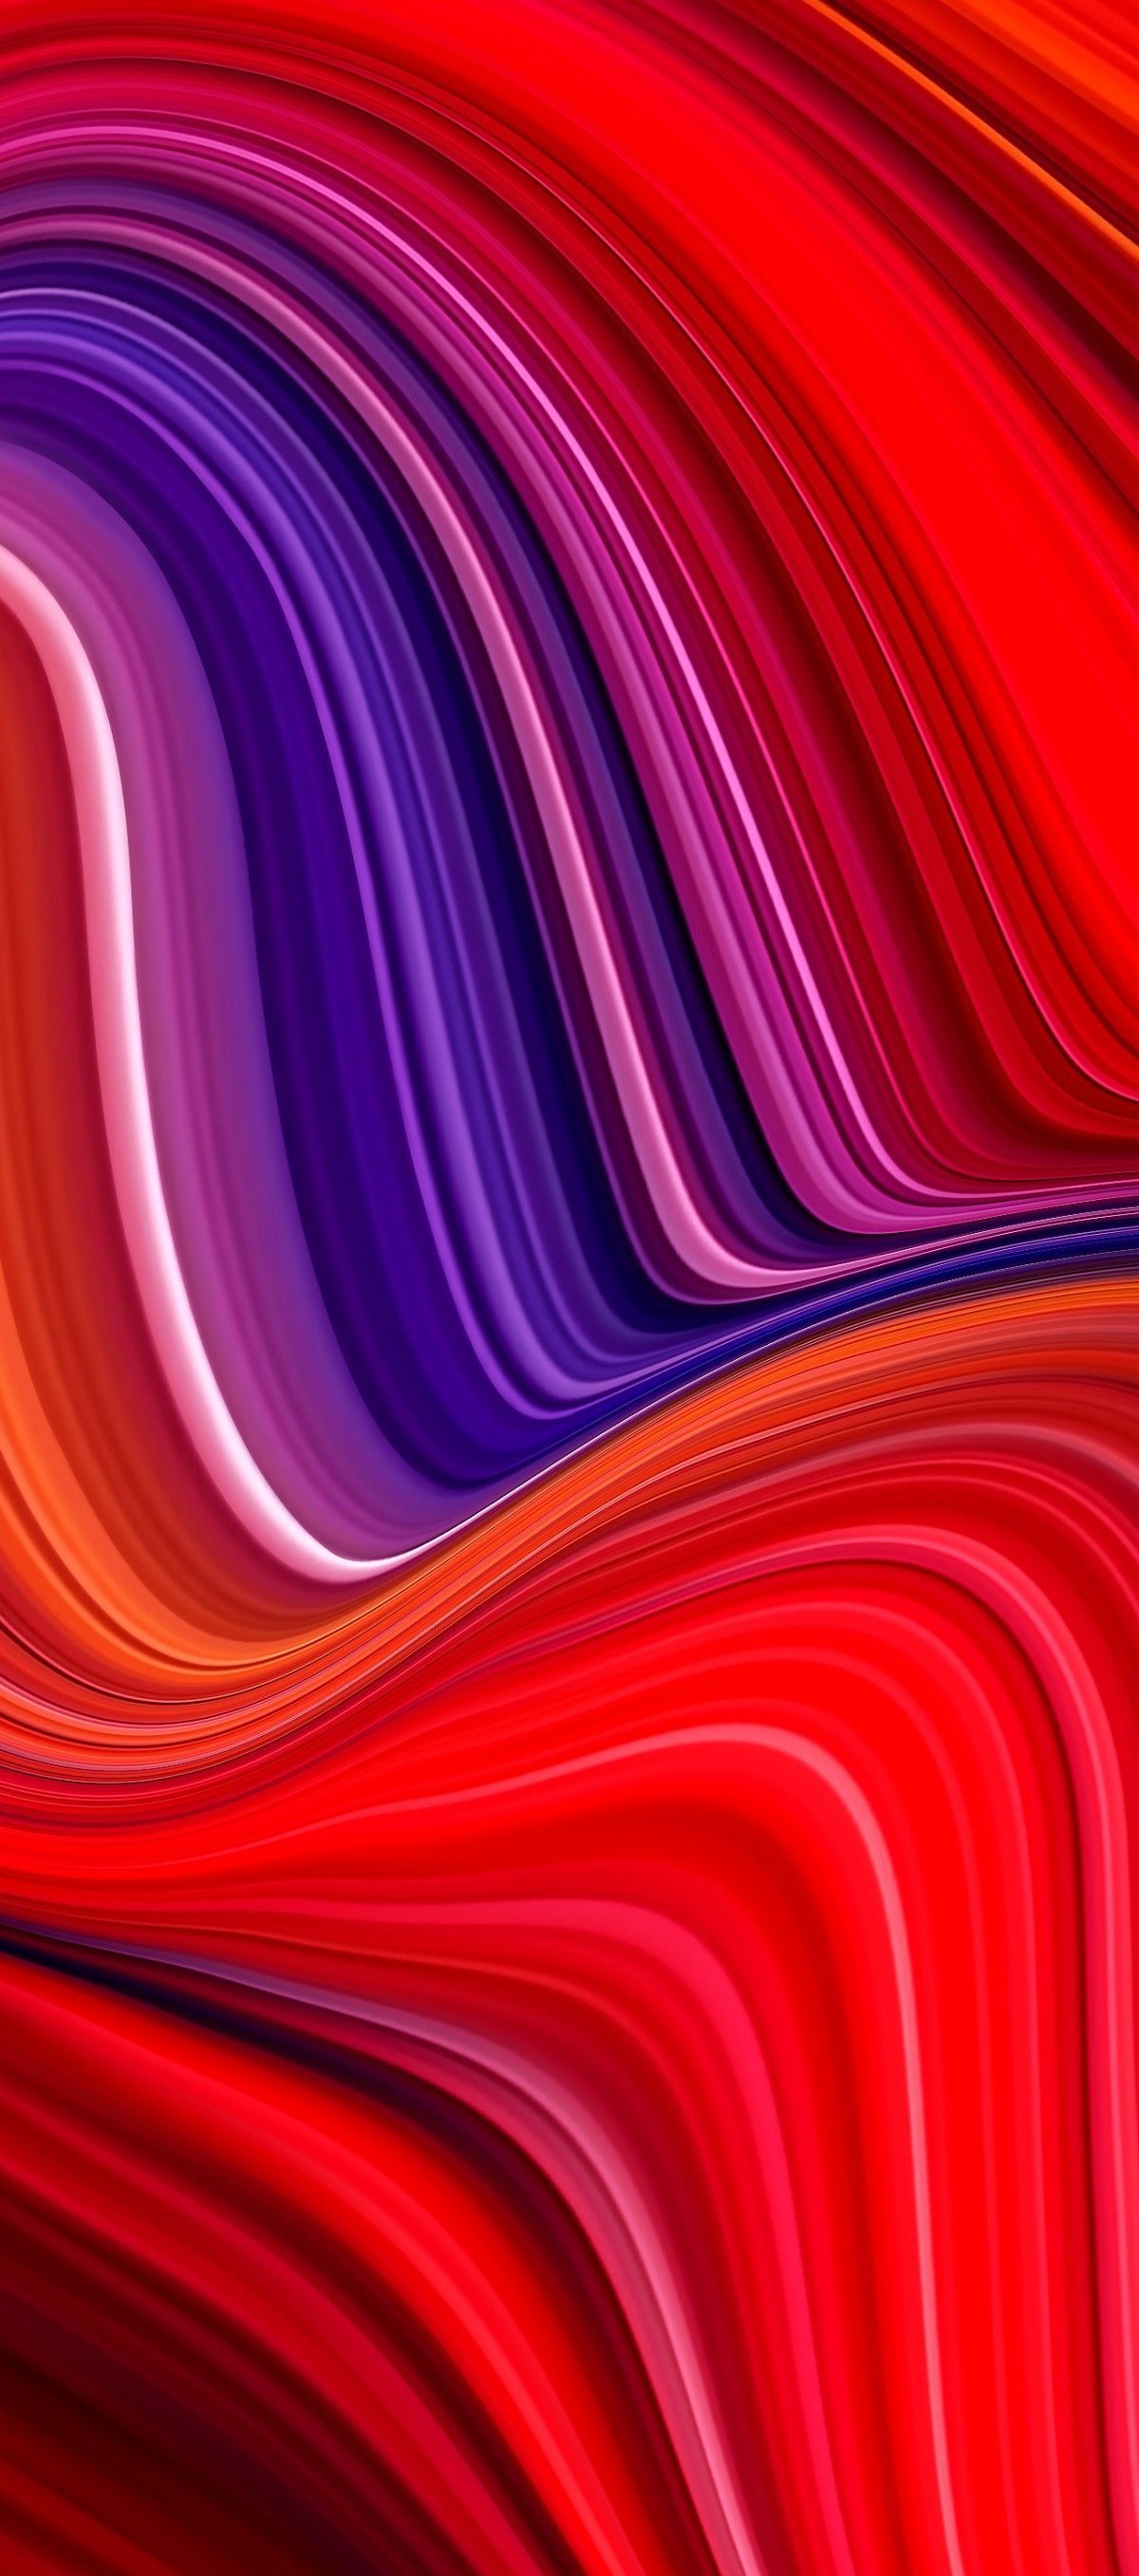 iOS iPhone X, red, purple, clean, simple, abstract, apple, wallpaper, iphone clean, beauty, colour, iOS,. Cellphone wallpaper, iPhone wallpaper, Wallpaper